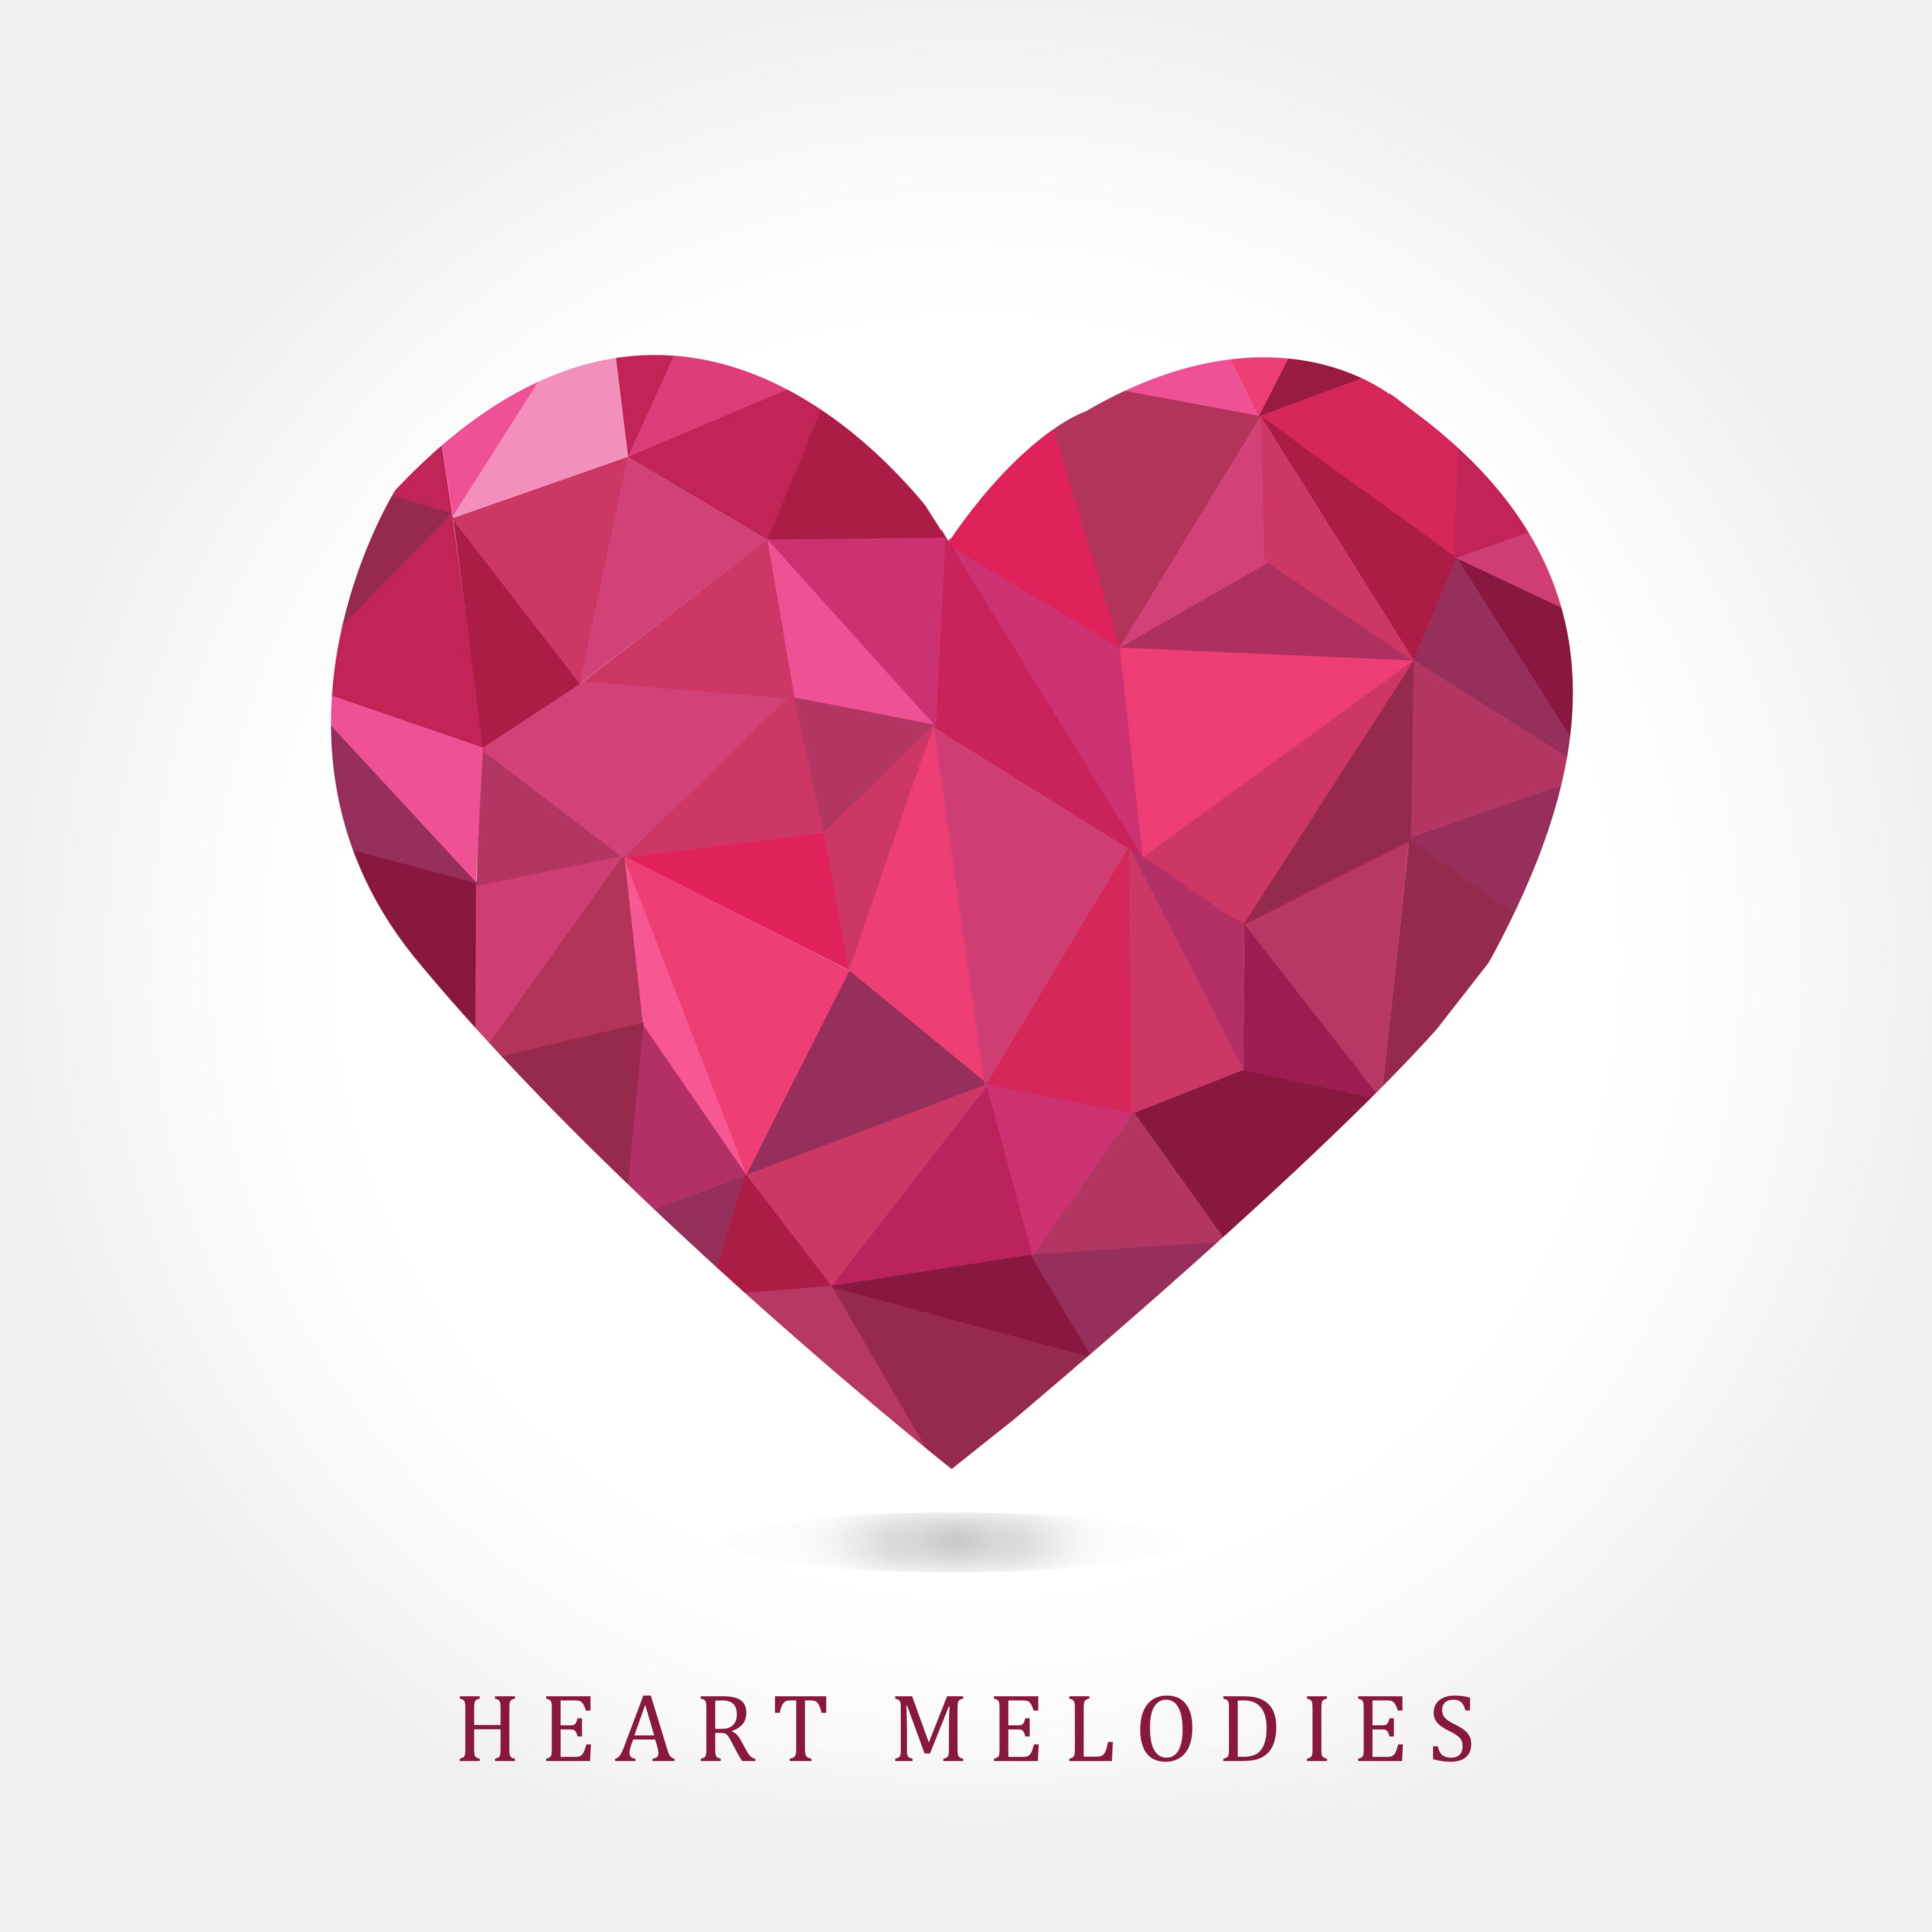 Heart Melodies